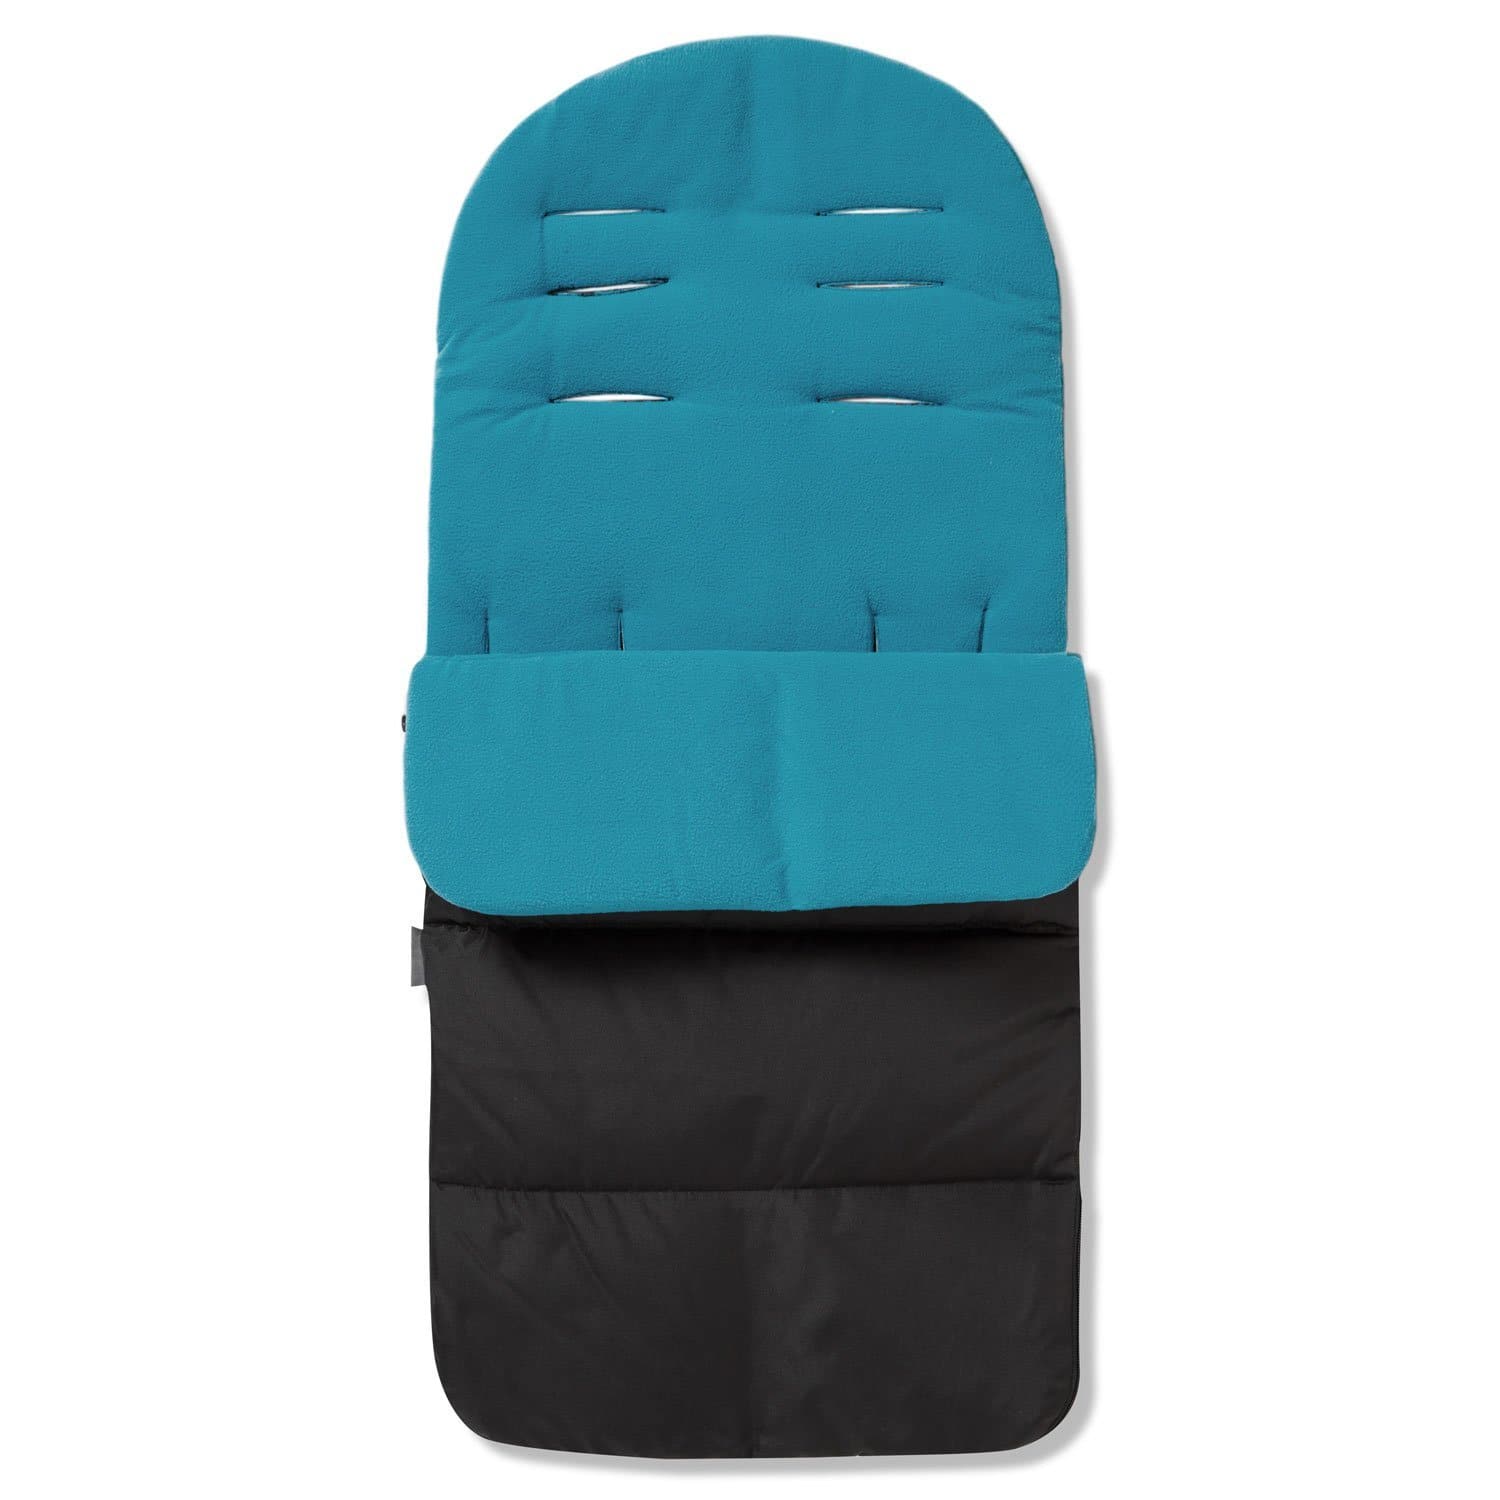 Premium Footmuff / Cosy Toes Compatible with Babywelt - Ocean Blue / Fits All Models | For Your Little One